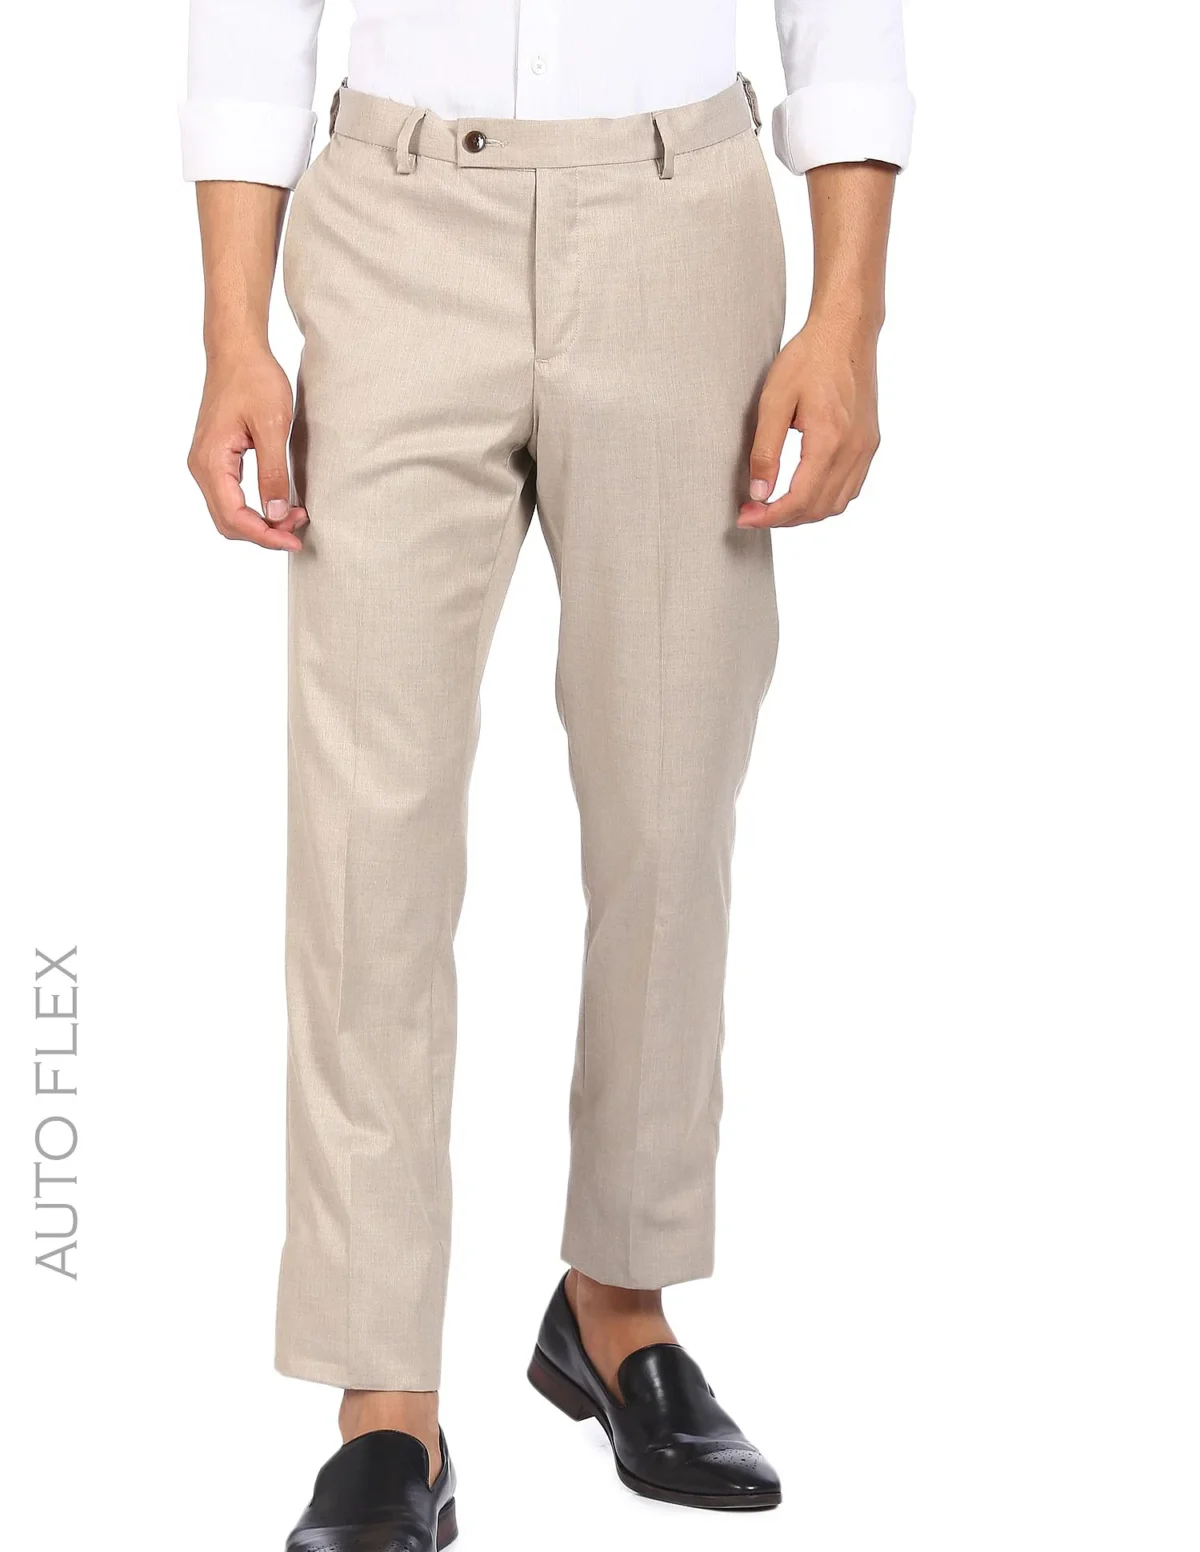 Arrow Sports Bronson Slim Fit Autoflex Trousers Buy Arrow Sports Bronson  Slim Fit Autoflex Trousers Online at Best Price in India  NykaaMan